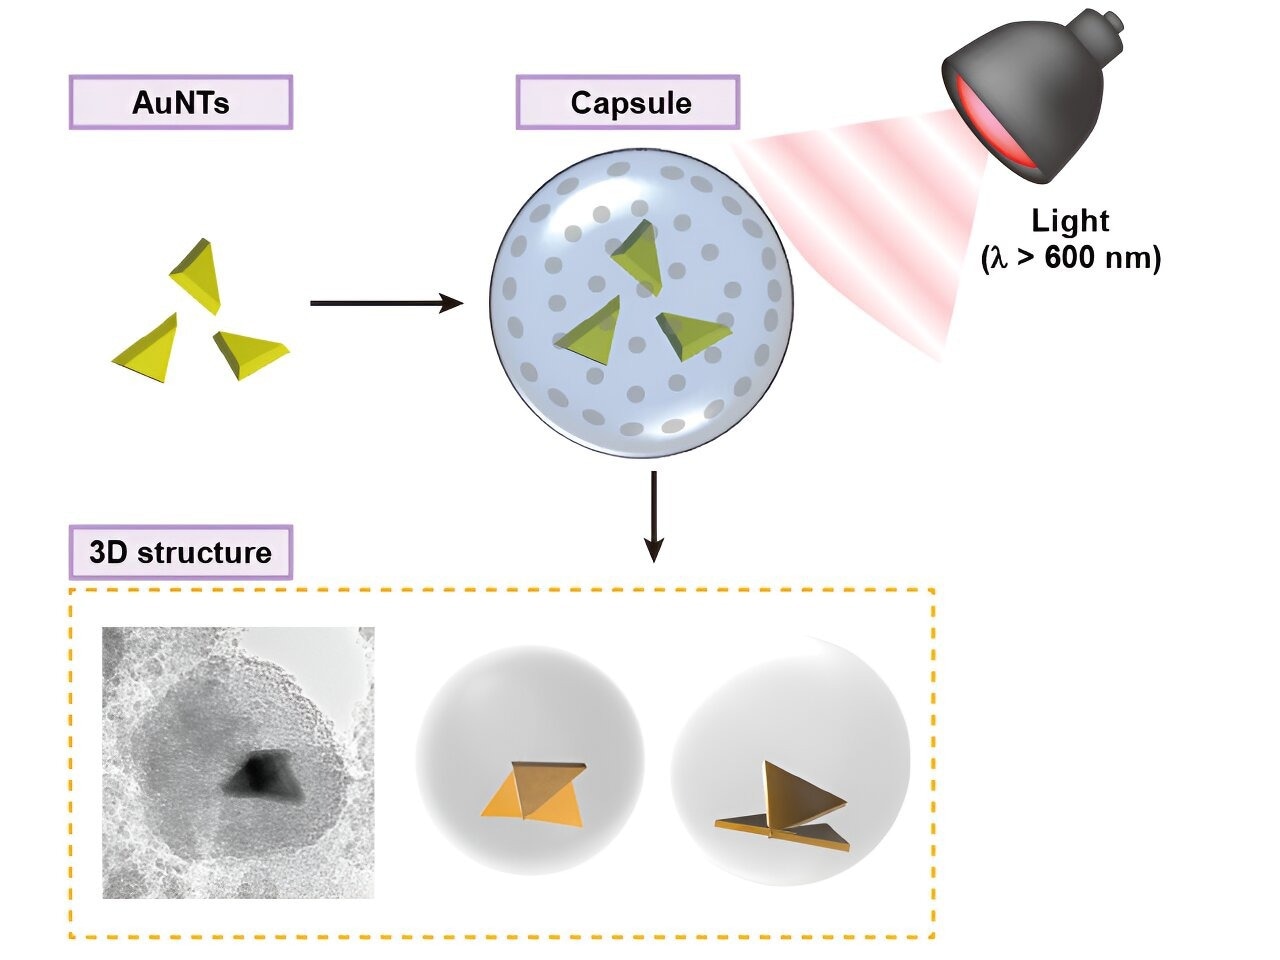 Anisotropic Gold Nanoparticles in Submicron Capsules: A Three-Dimensional Construction